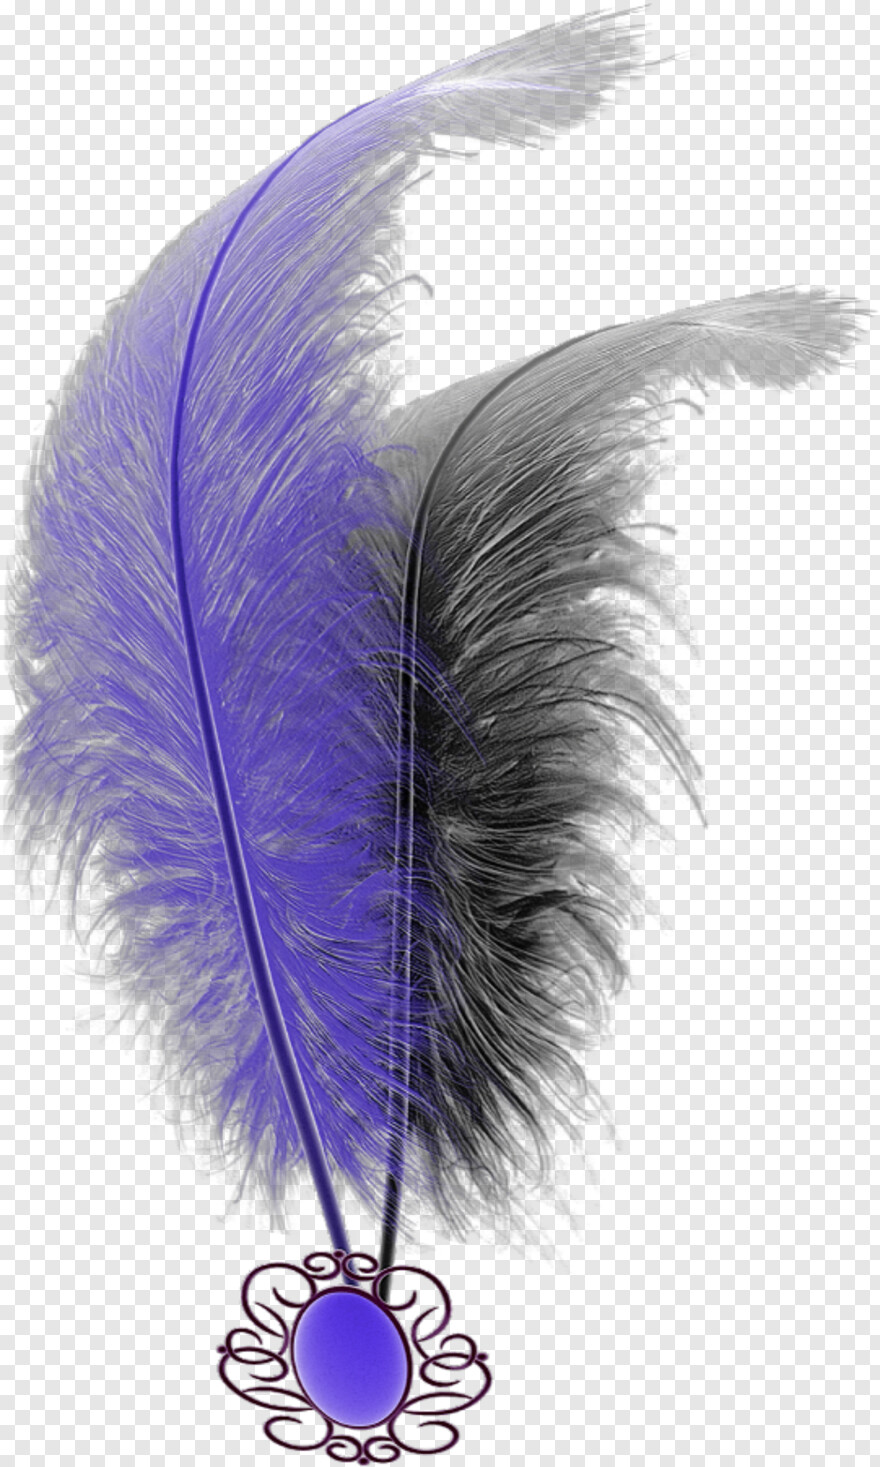 feather-silhouette # 842621